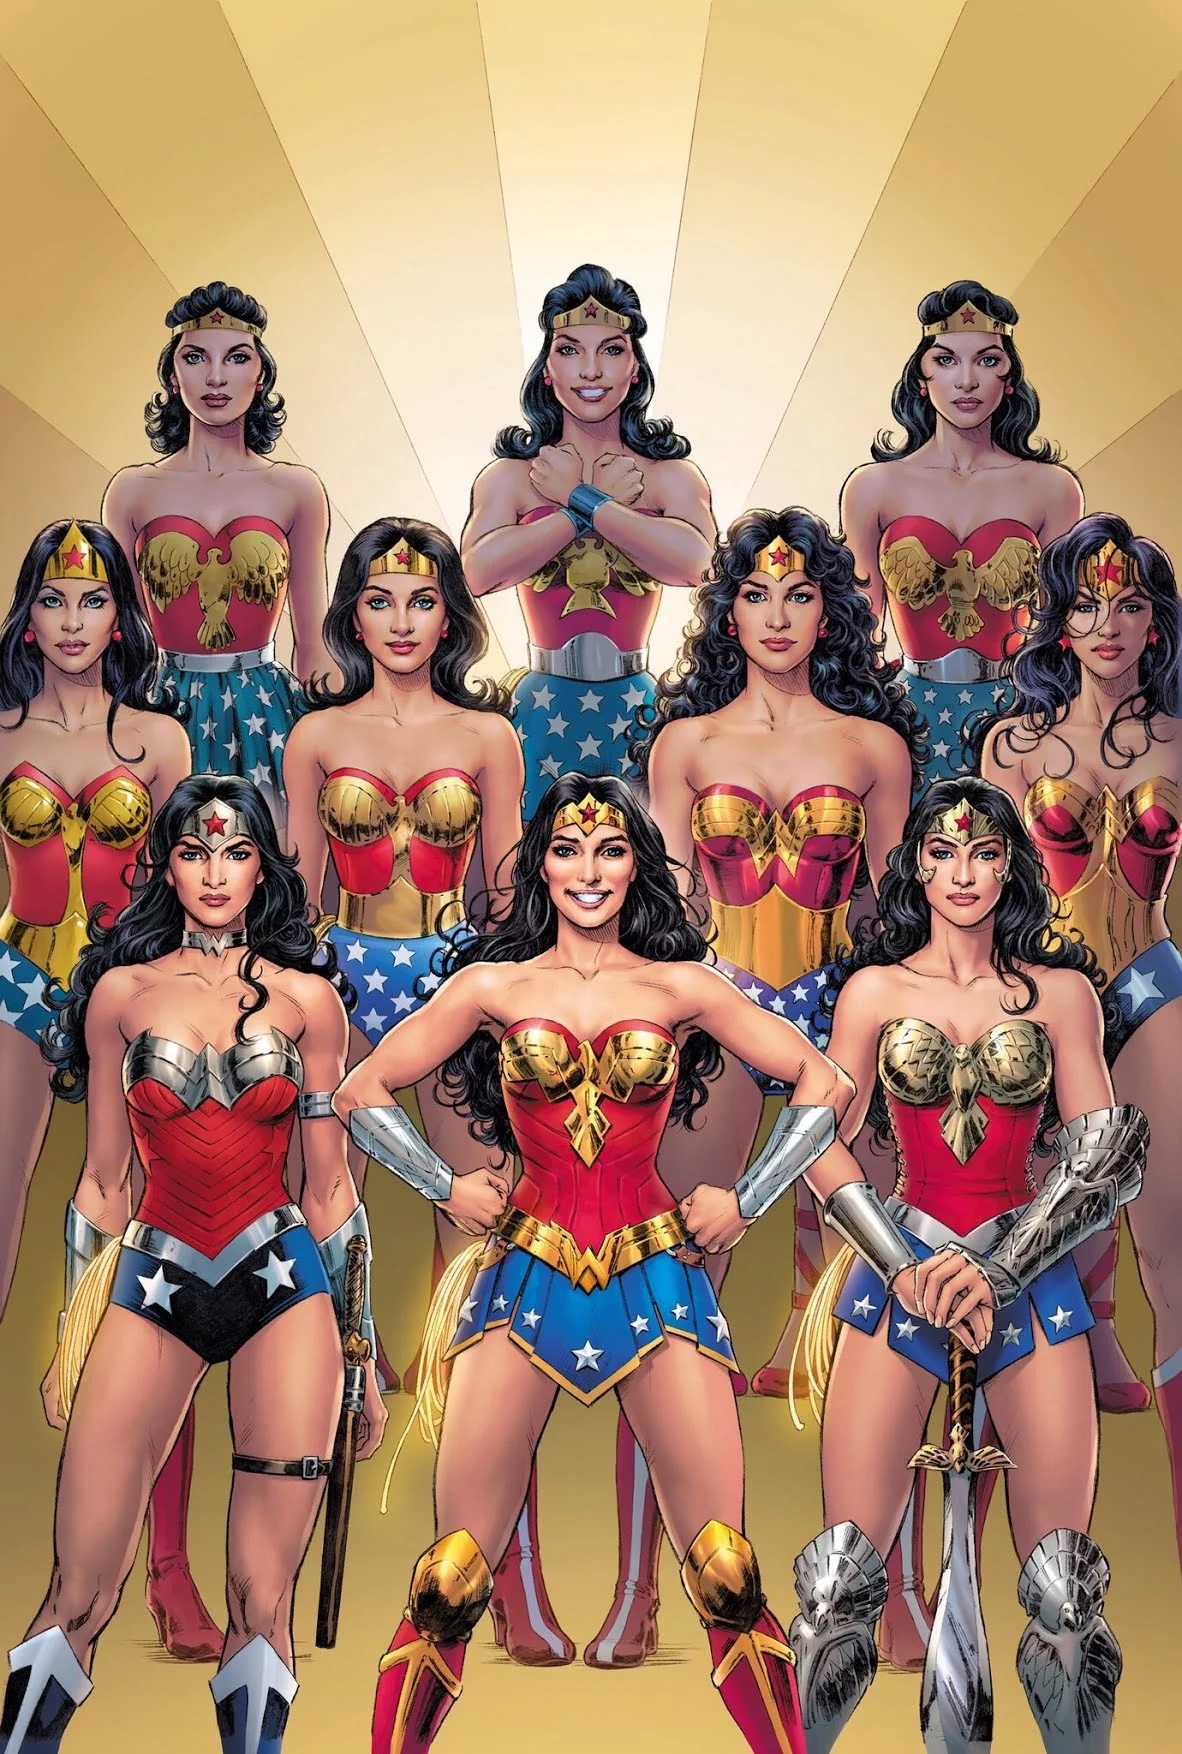 Wonder Woman through the years, all in a group. A Miramar, FL therapist for women gives tips for a self-compassion practice with perfectionism counseling in Miramar, FL. You can get online therapy in Florida here.